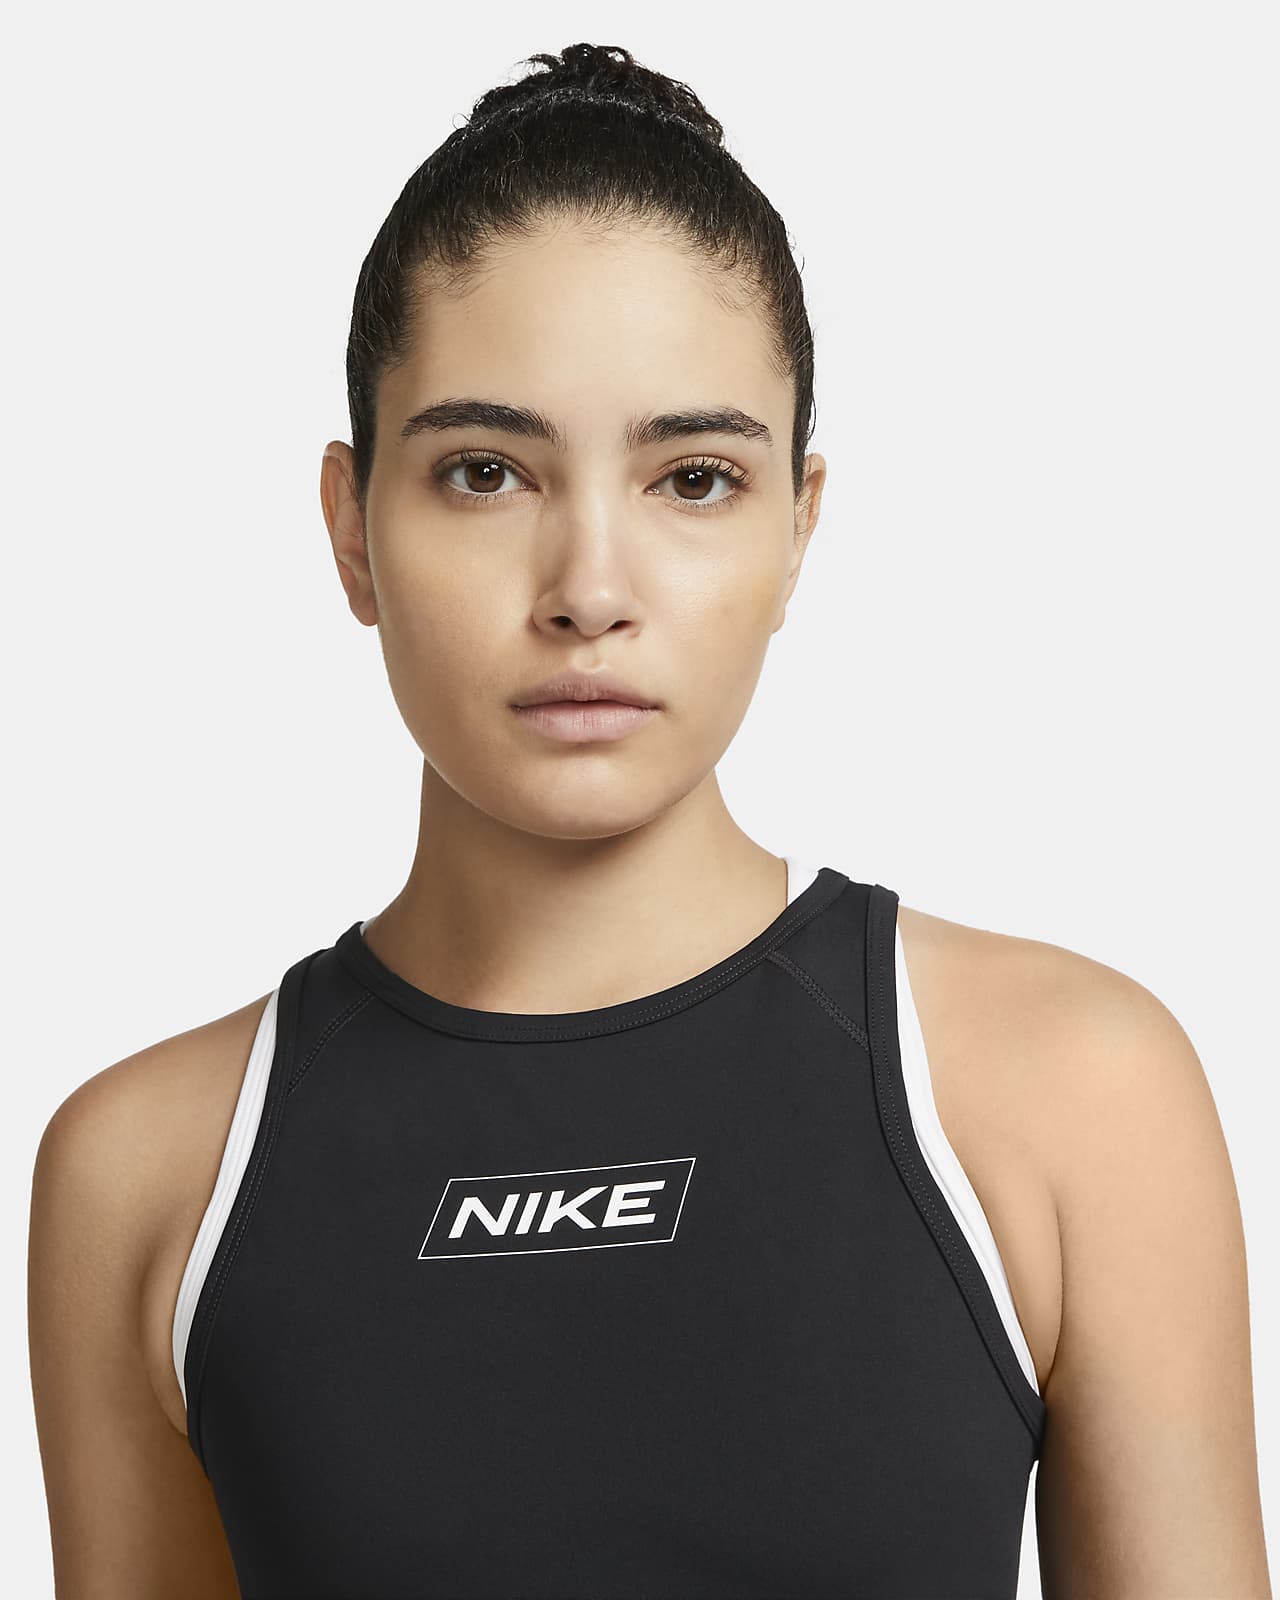 https://static.nike.com/a/images/t_PDP_1280_v1/f_auto,q_auto:eco/93b6fa9c-3e14-4ff8-804e-de51ba4b0ac2/pro-dri-fit-graphic-crop-tank-rJCCk6.png